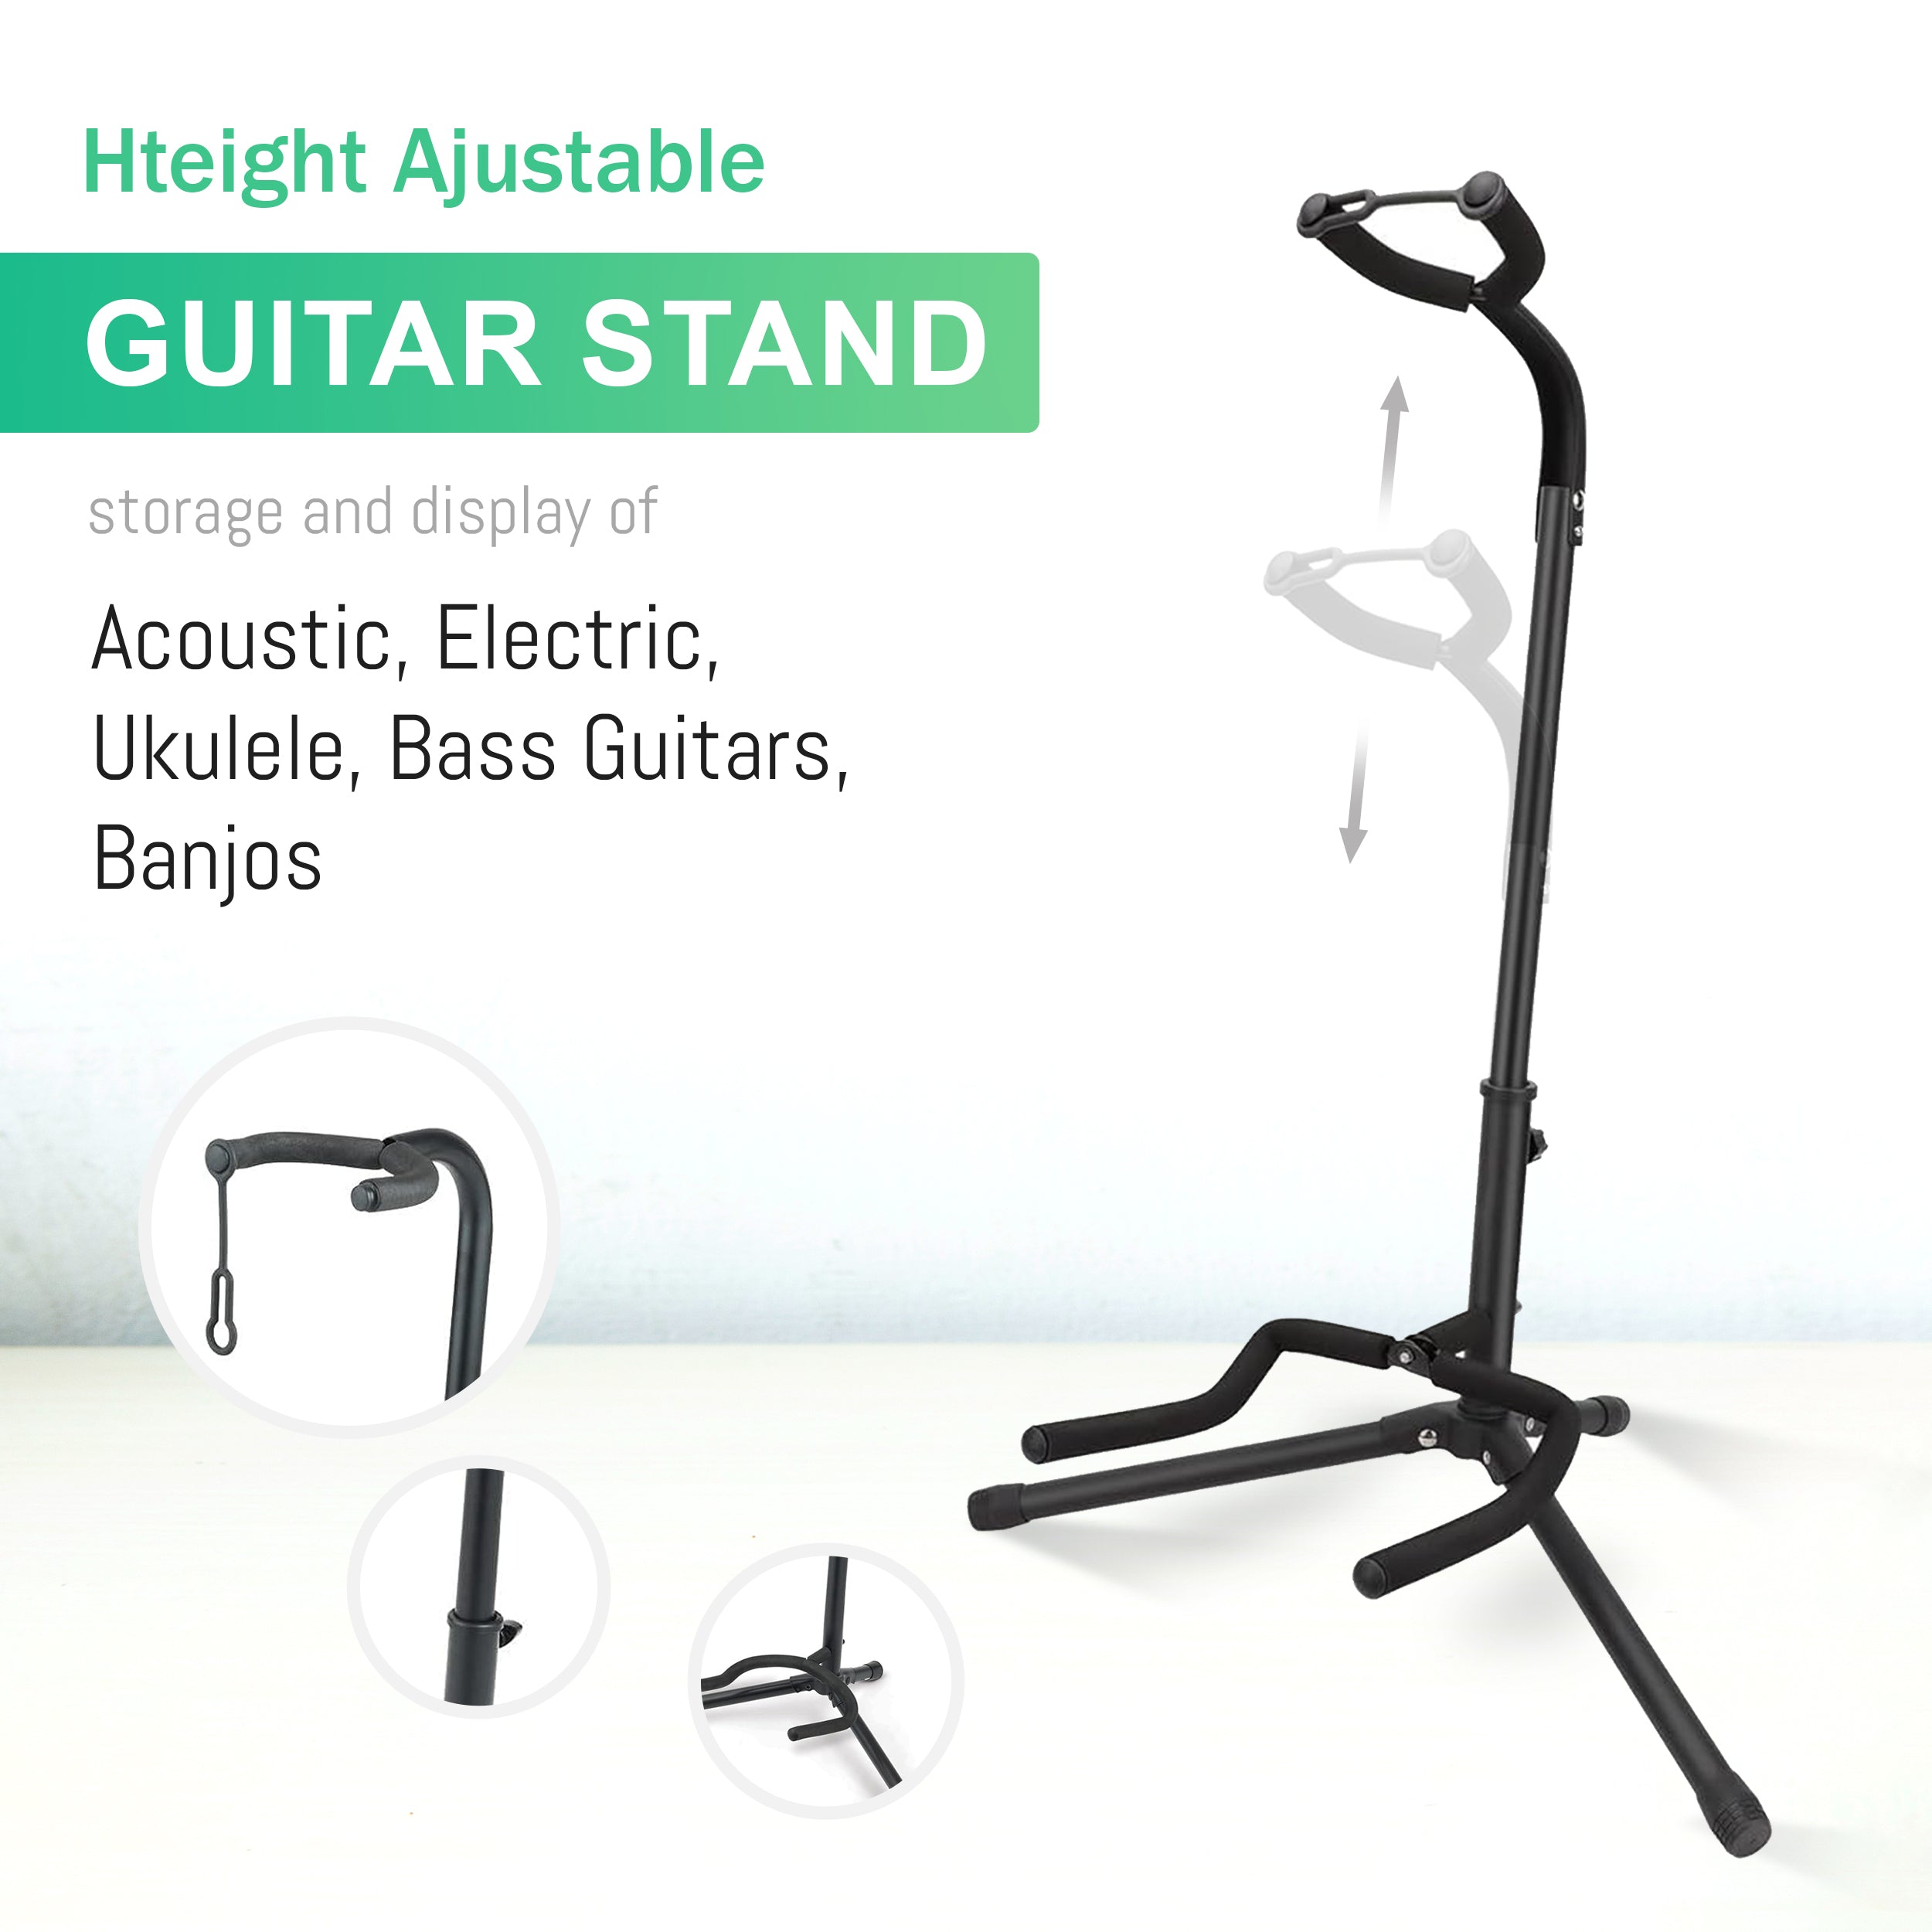 Versatile Folding Stand for Acoustic, Electric, and Bass Guitars, Banjos - Black